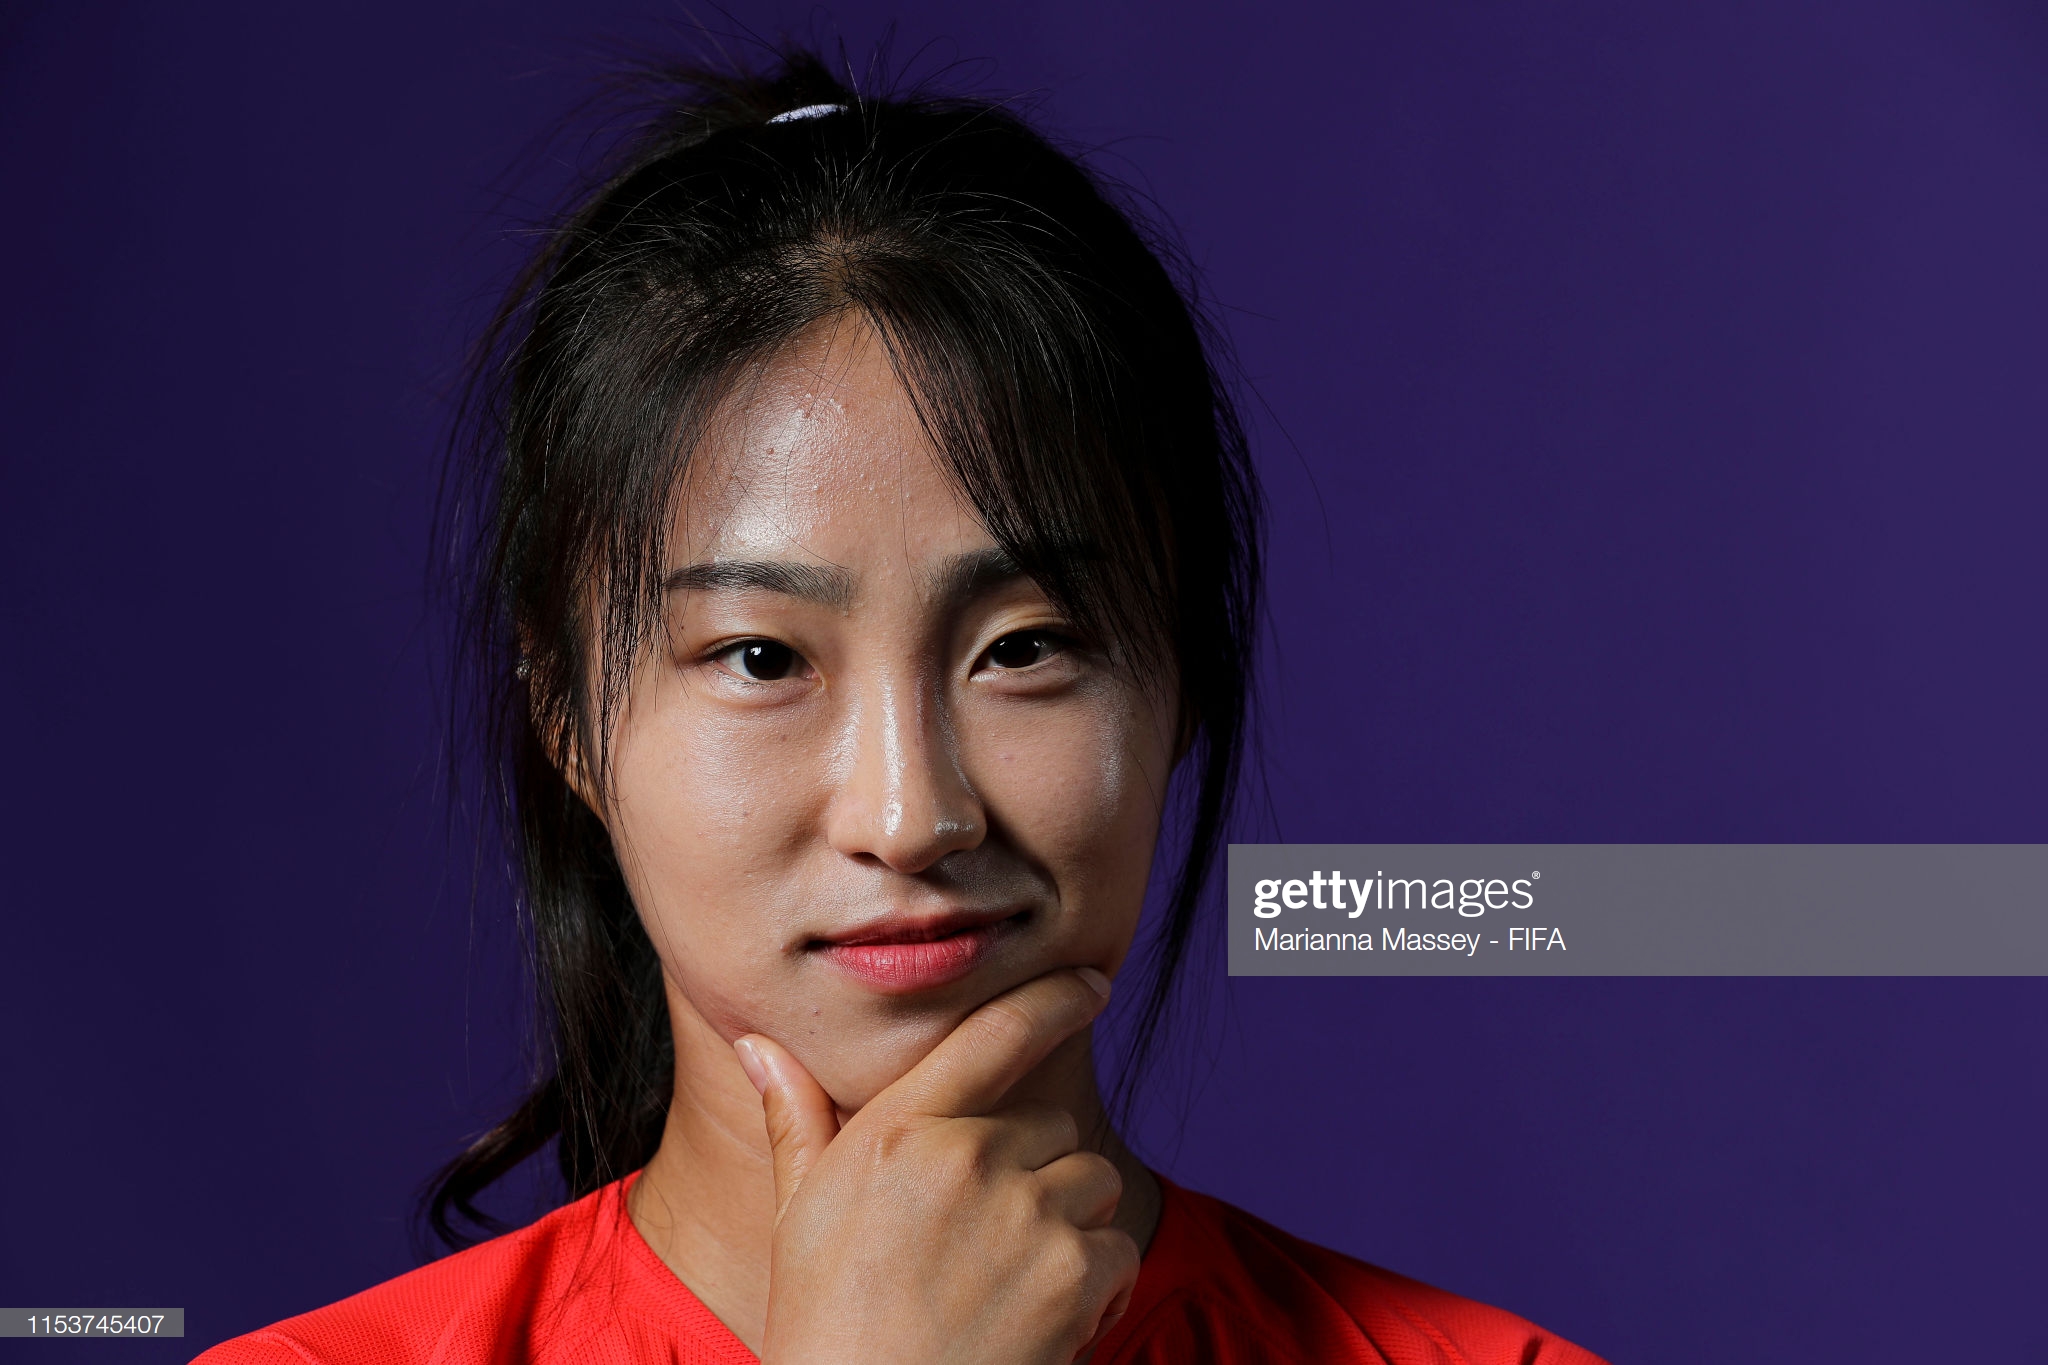 gettyimages-1153745407-2048x2048.jpg